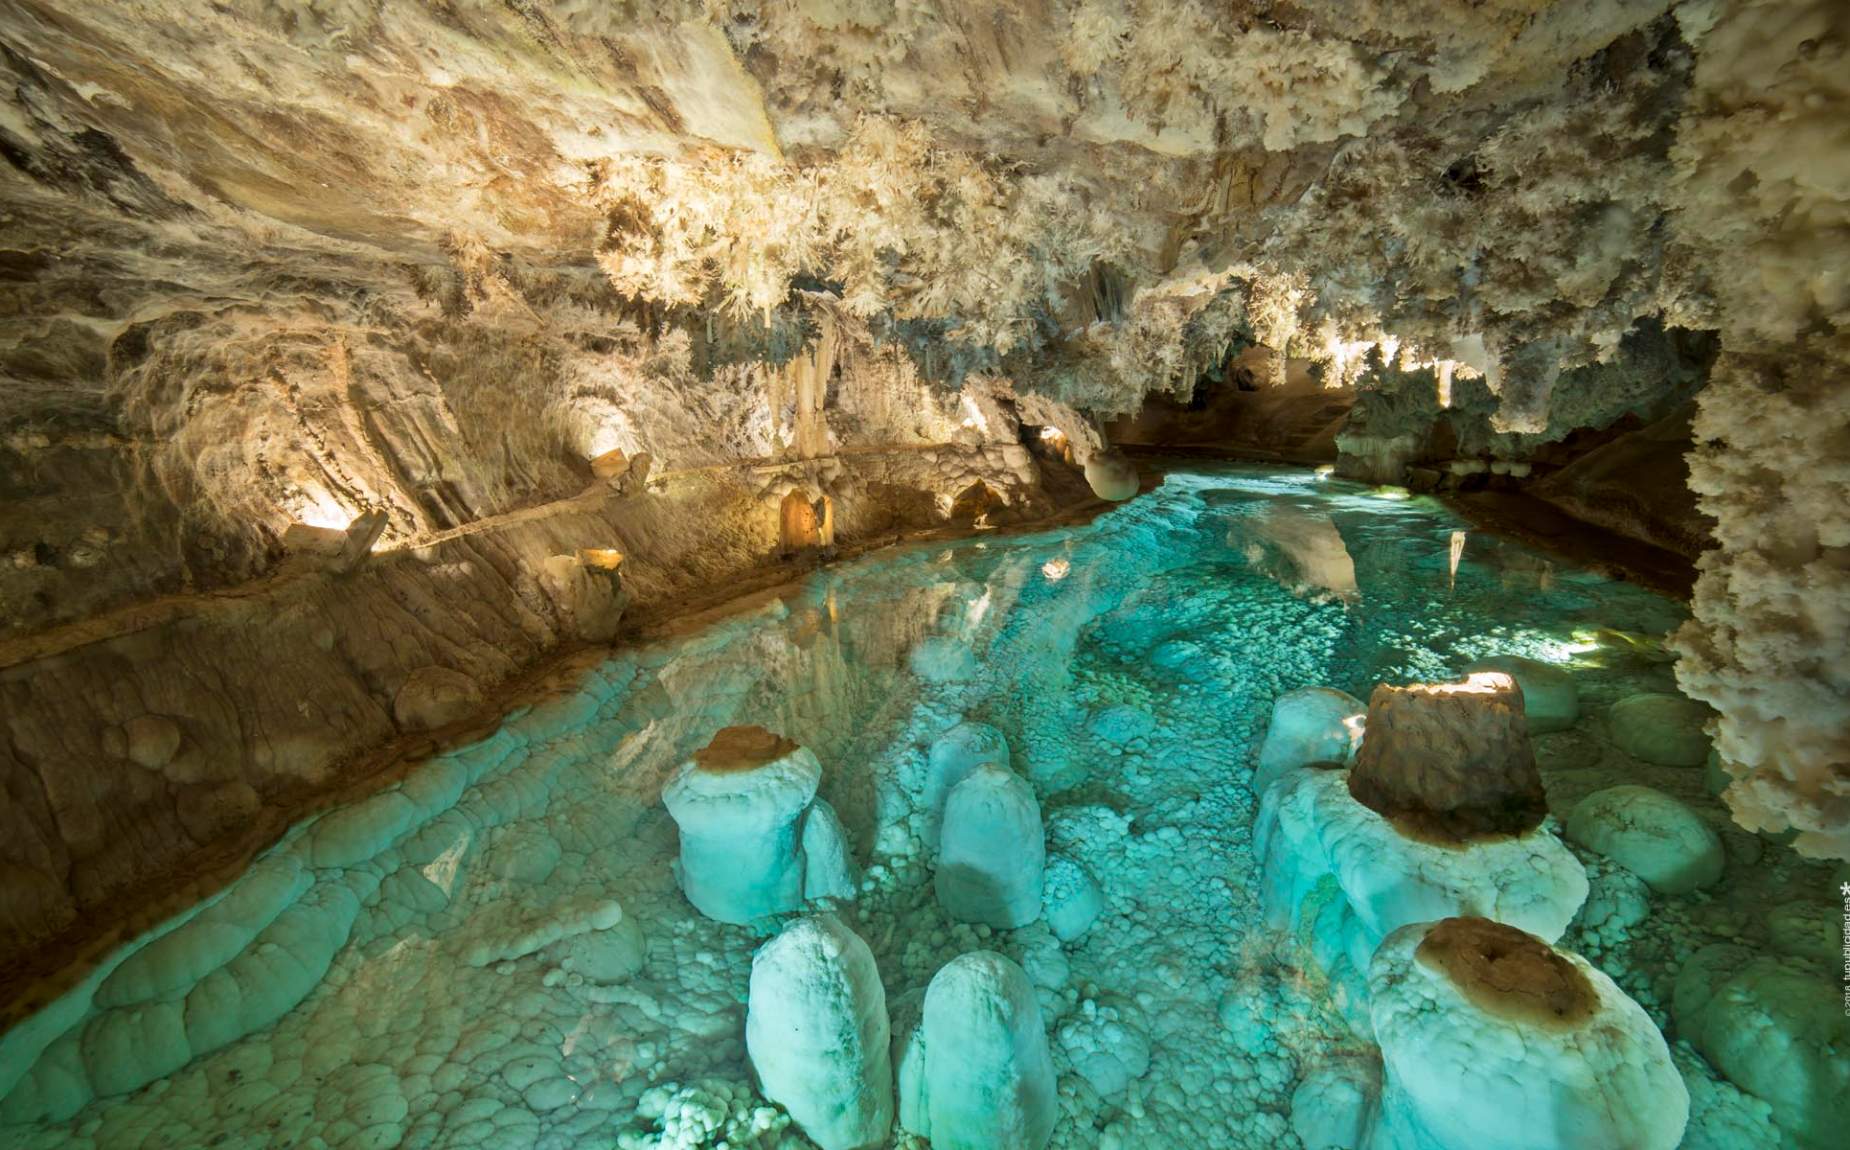 Cave with subterranean waters